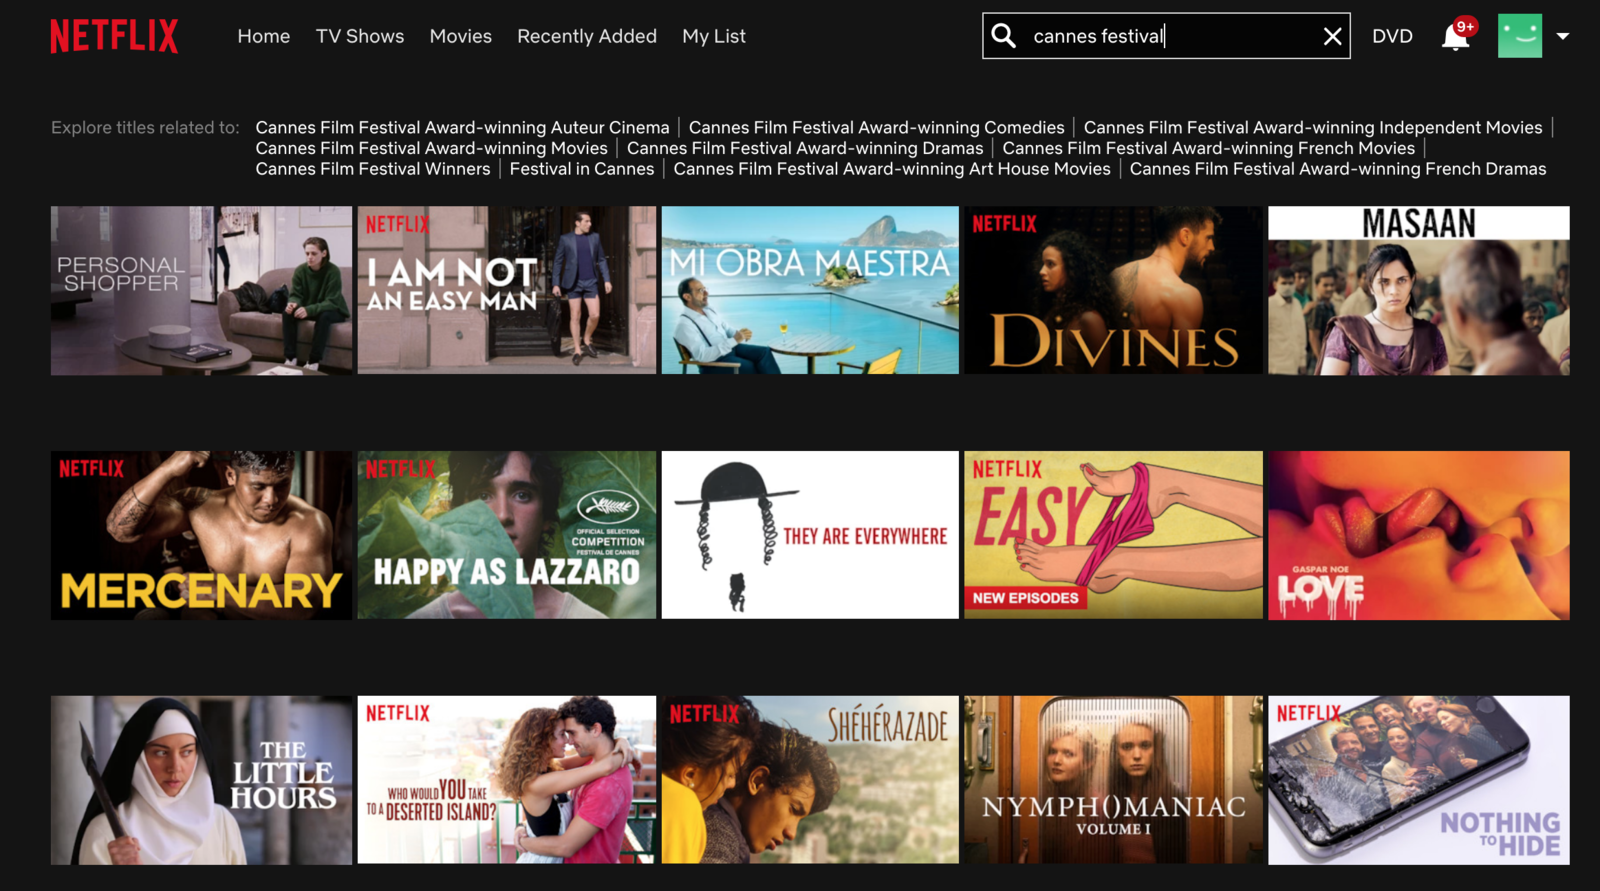 This Trick For Movie Lovers Will Change The Way You Use Your Netflix Account